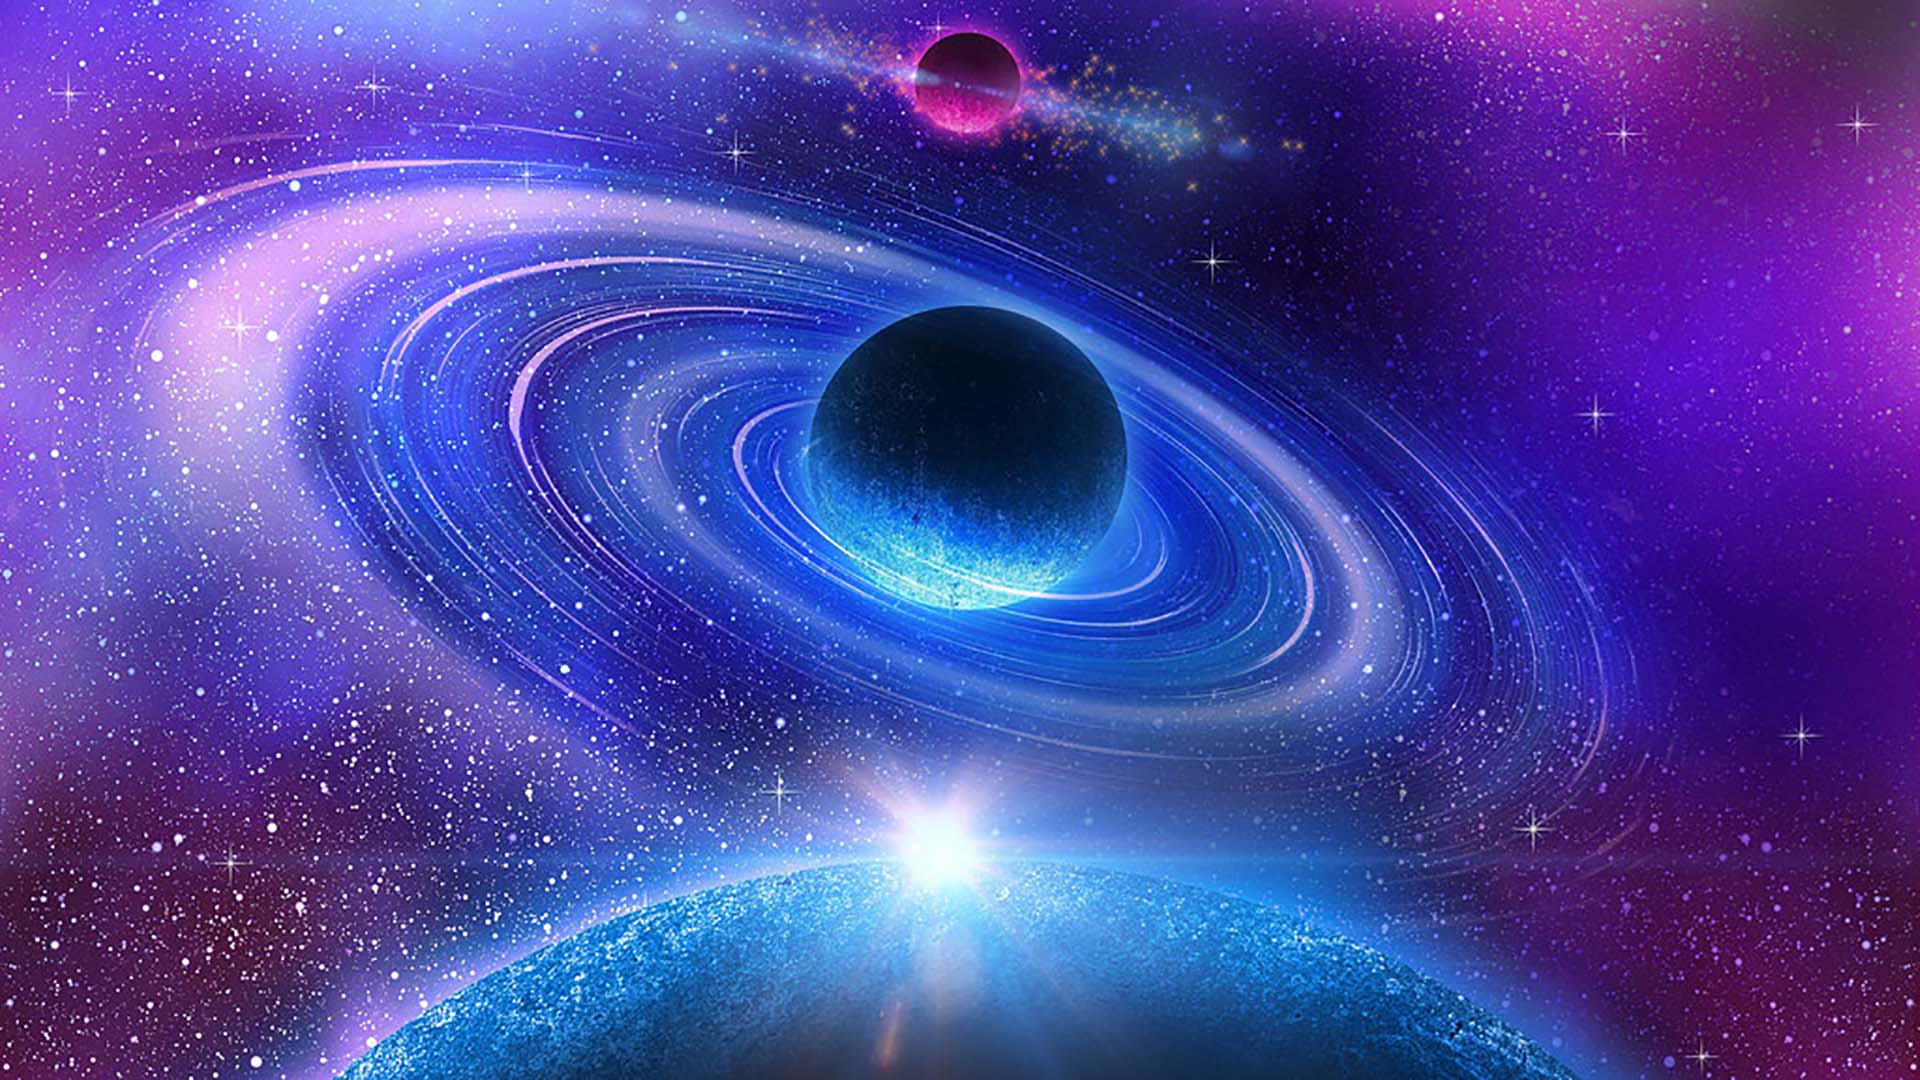 Download Galaxy Wallpapers HD Free 